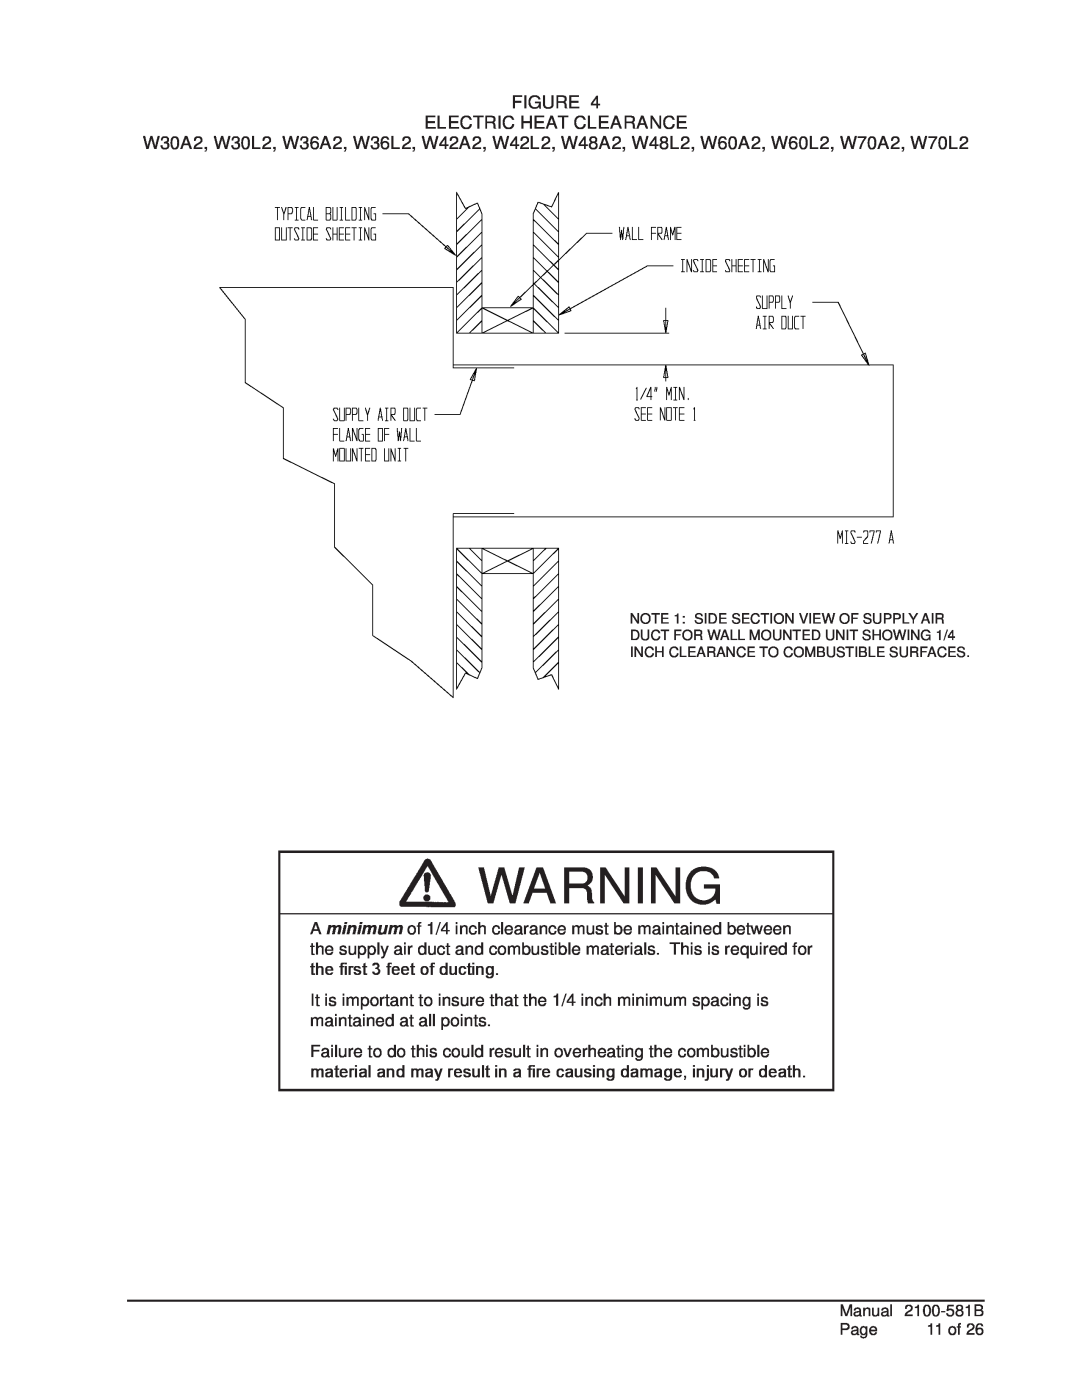 Bard w17a2 installation instructions Figure Electric Heat Clearance, Manual, 2100-581B, Page, 11 of 